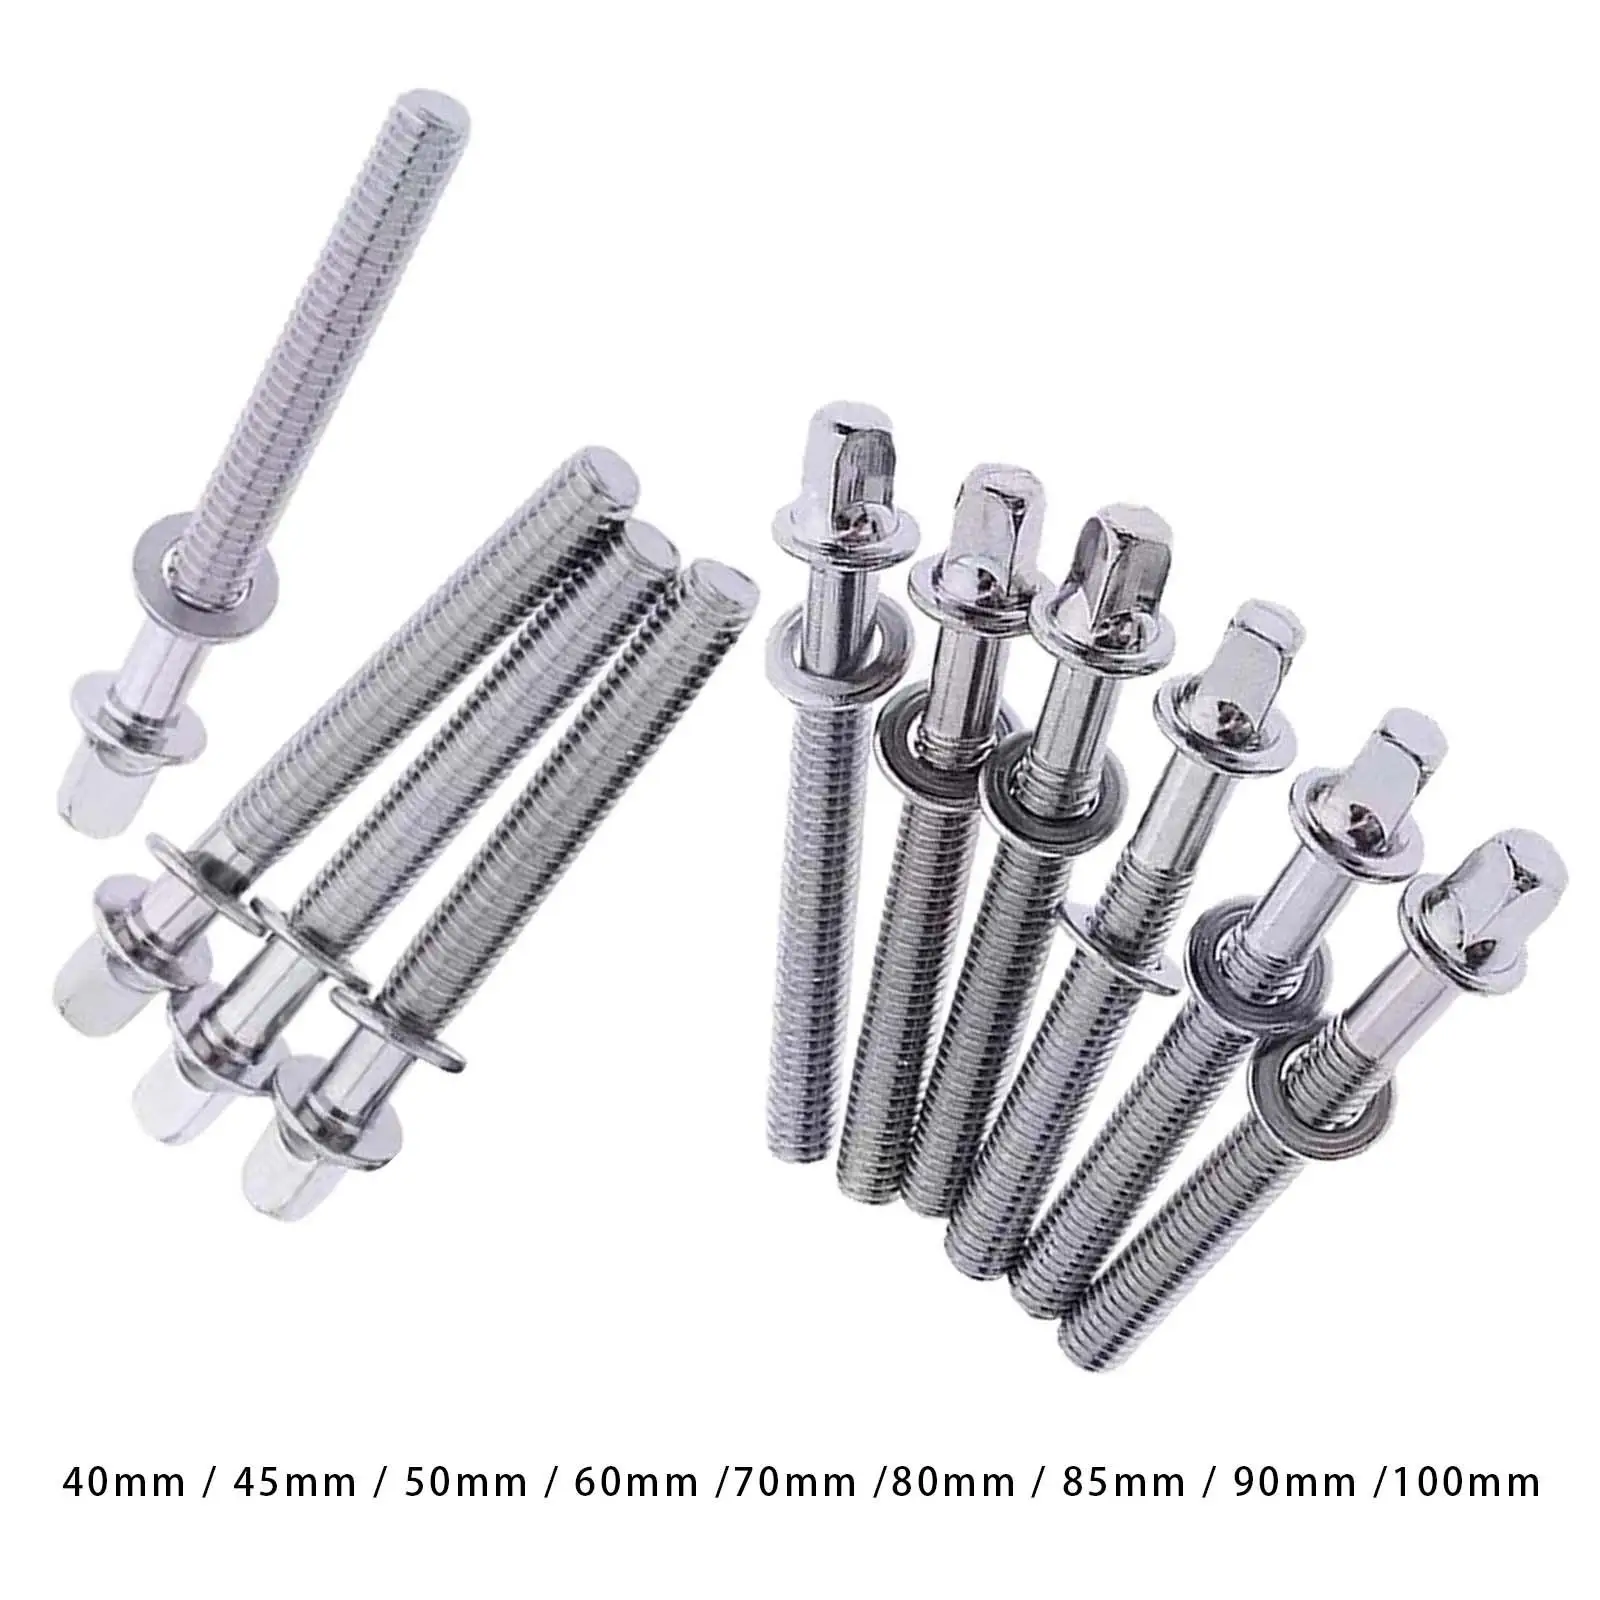 10 Pieces Drum Tight Screw Musical Instrument Accessory Percussion Parts Drums Accessories Universal Mounting Hardware for Drum